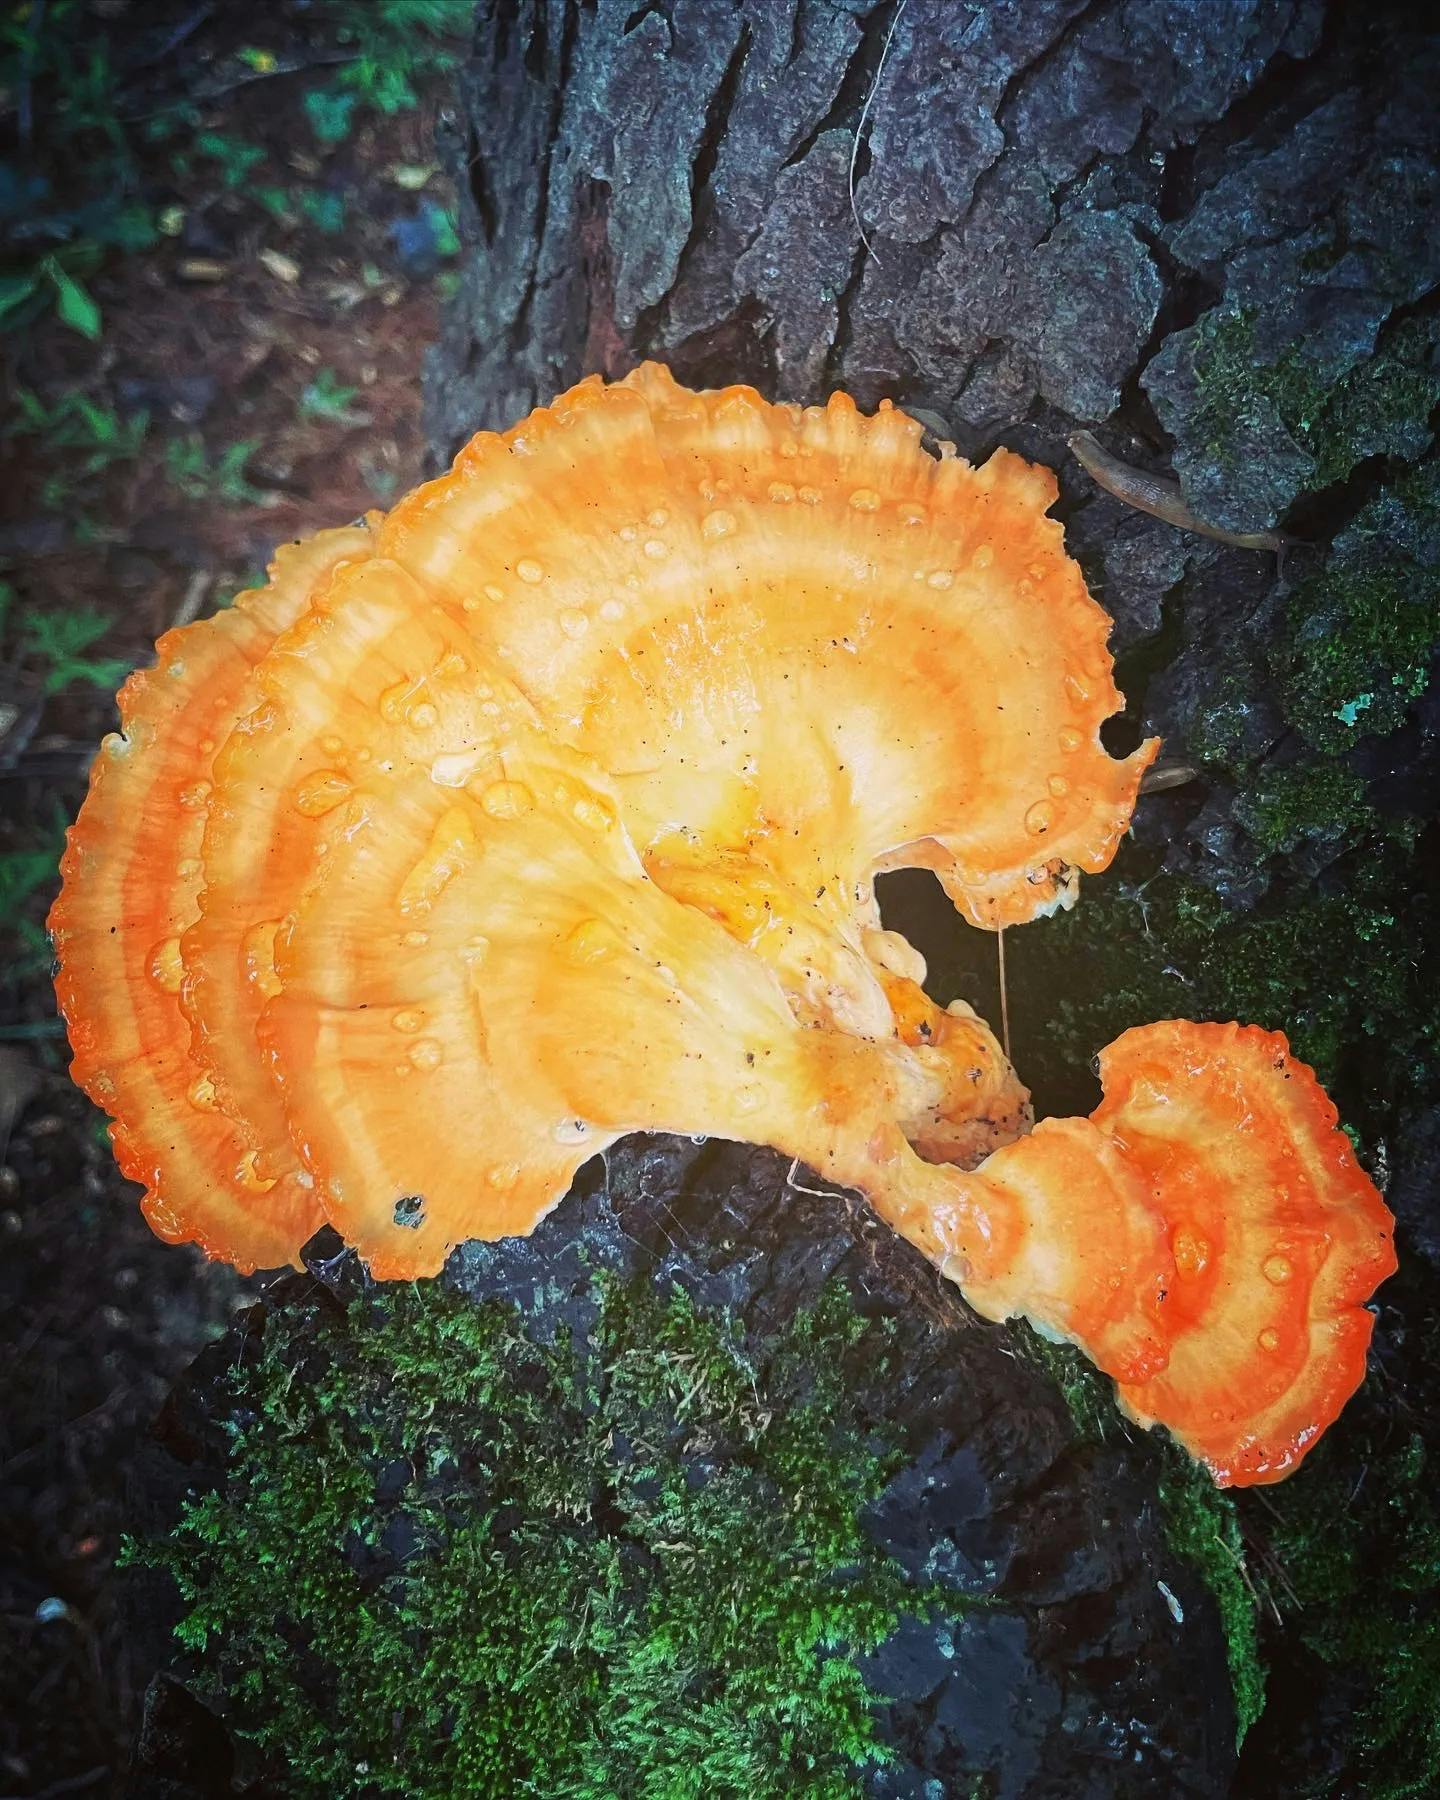 Chicken of the woods growing on a tree